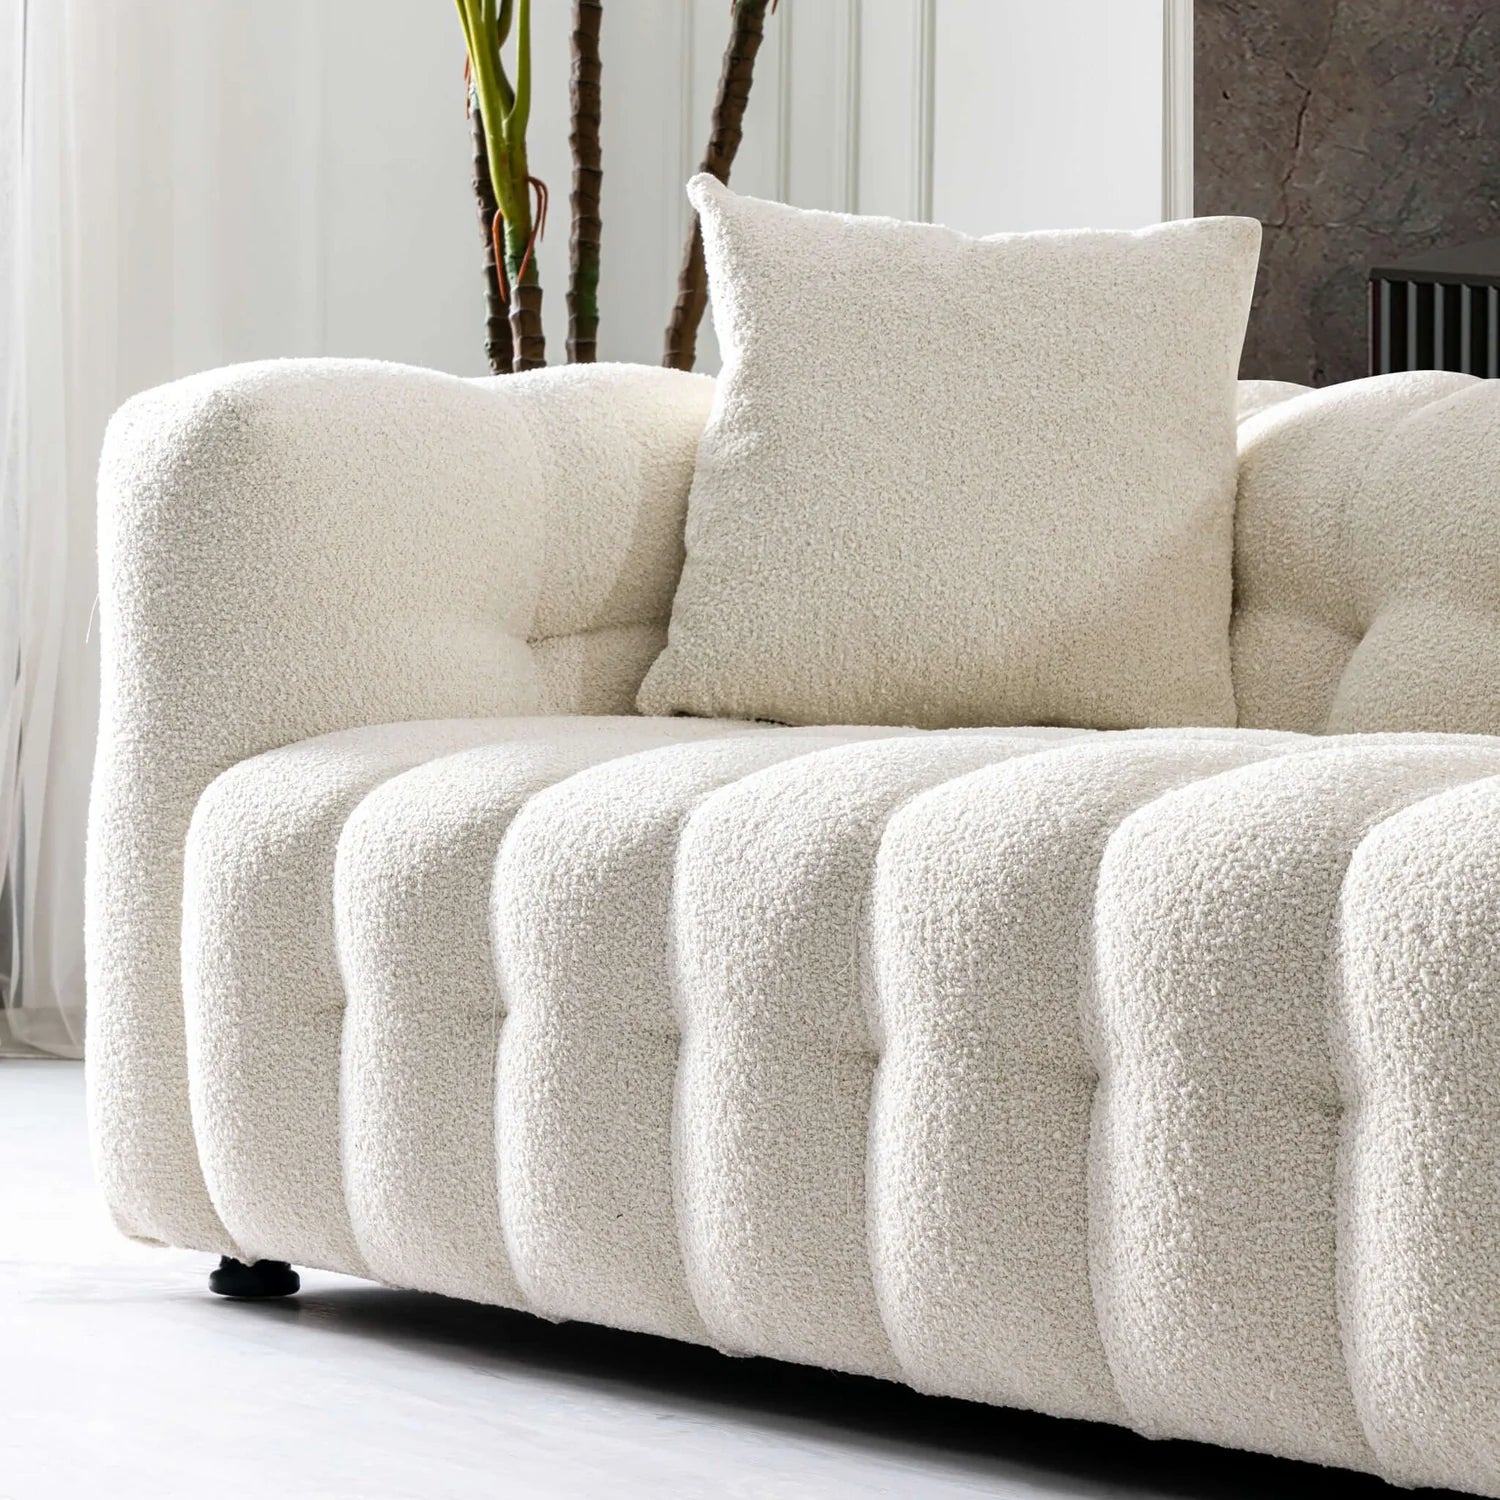 Eden Tufted Chesterfield Boucle Sofa - Berre Furniture